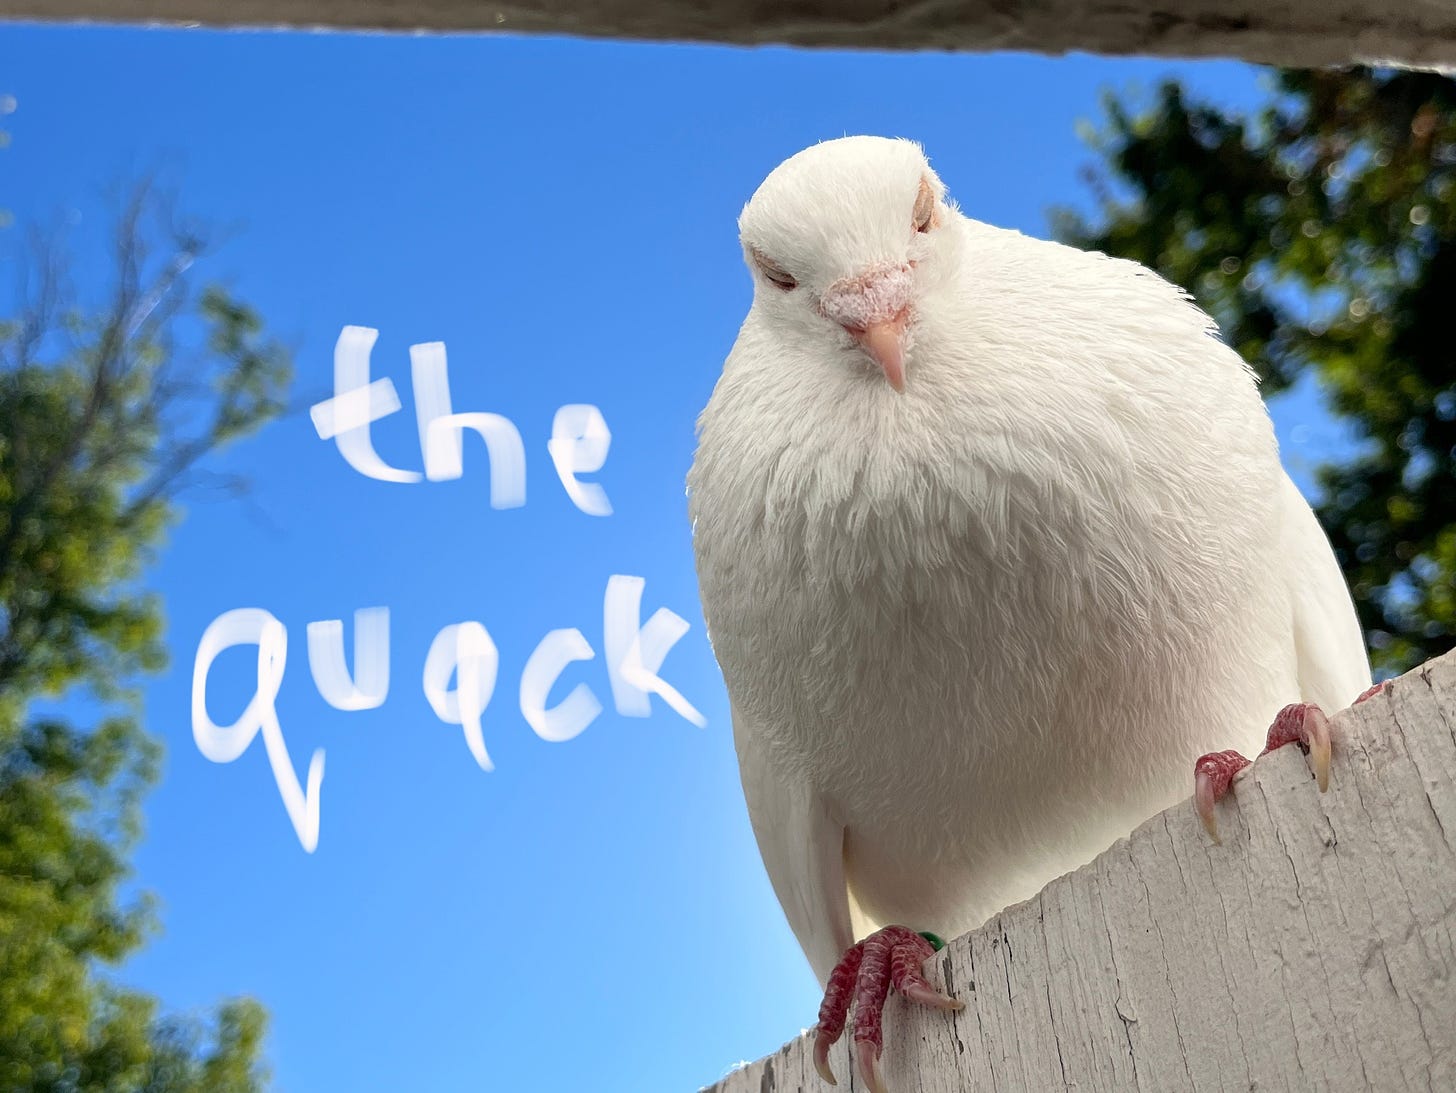 A grumpy looking white pigeon stares down from the top of my shed door. a blue sky is visible in the background. the words "the quack" are written on the sky in whispy white letters